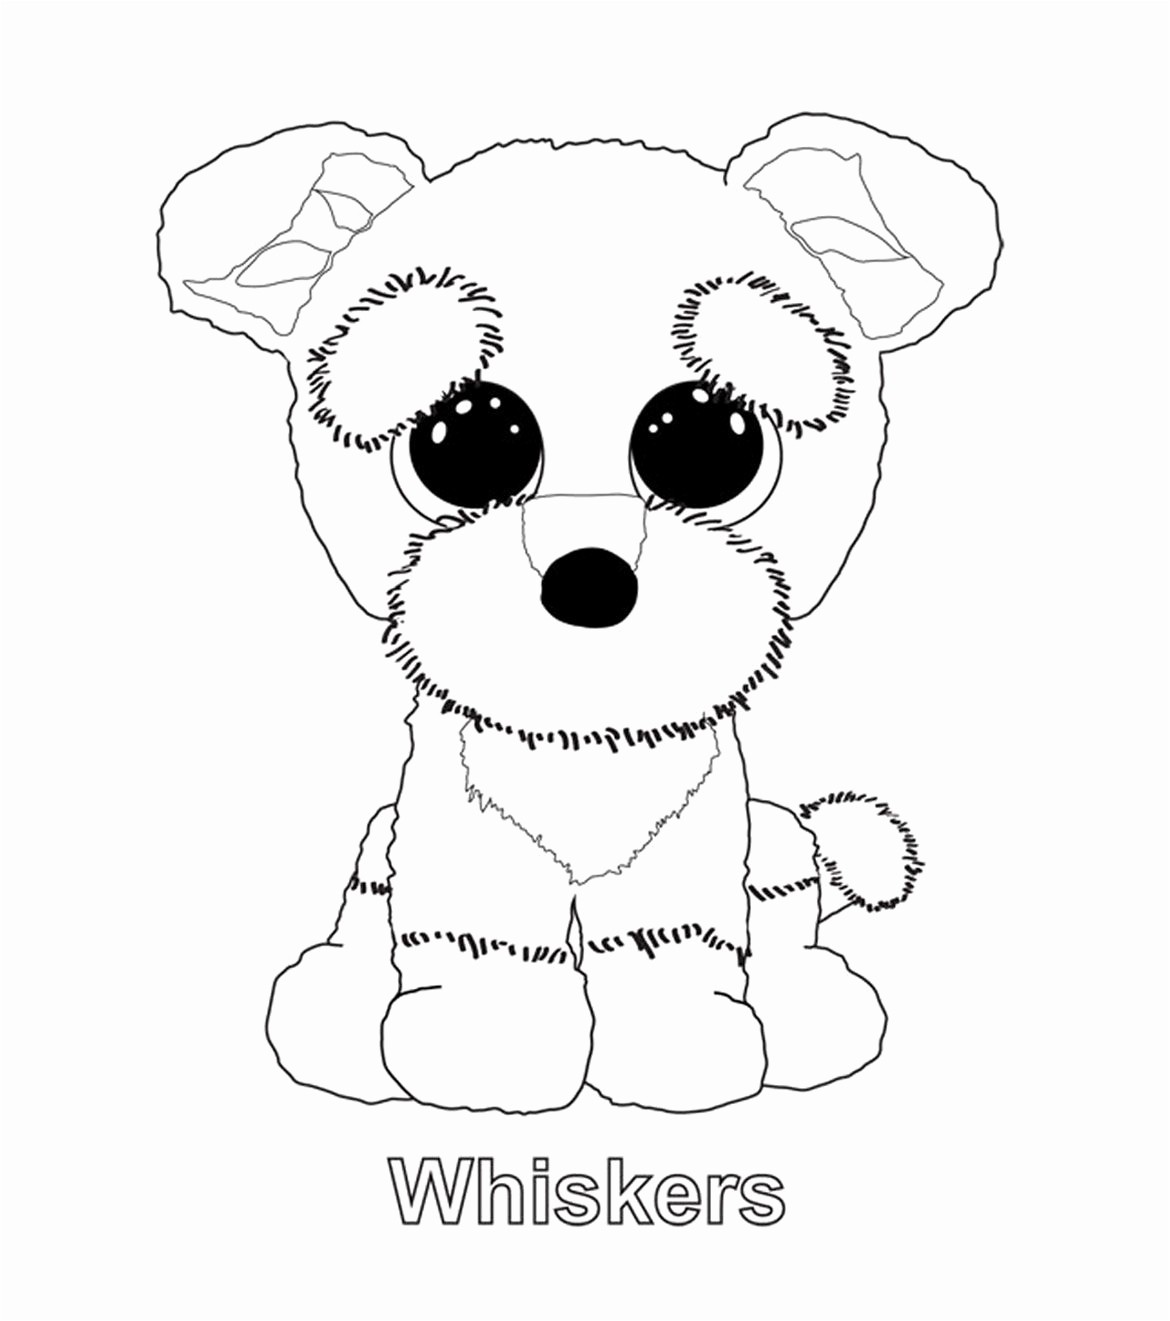 Whiskers - Beanie Boo Coloring Pages